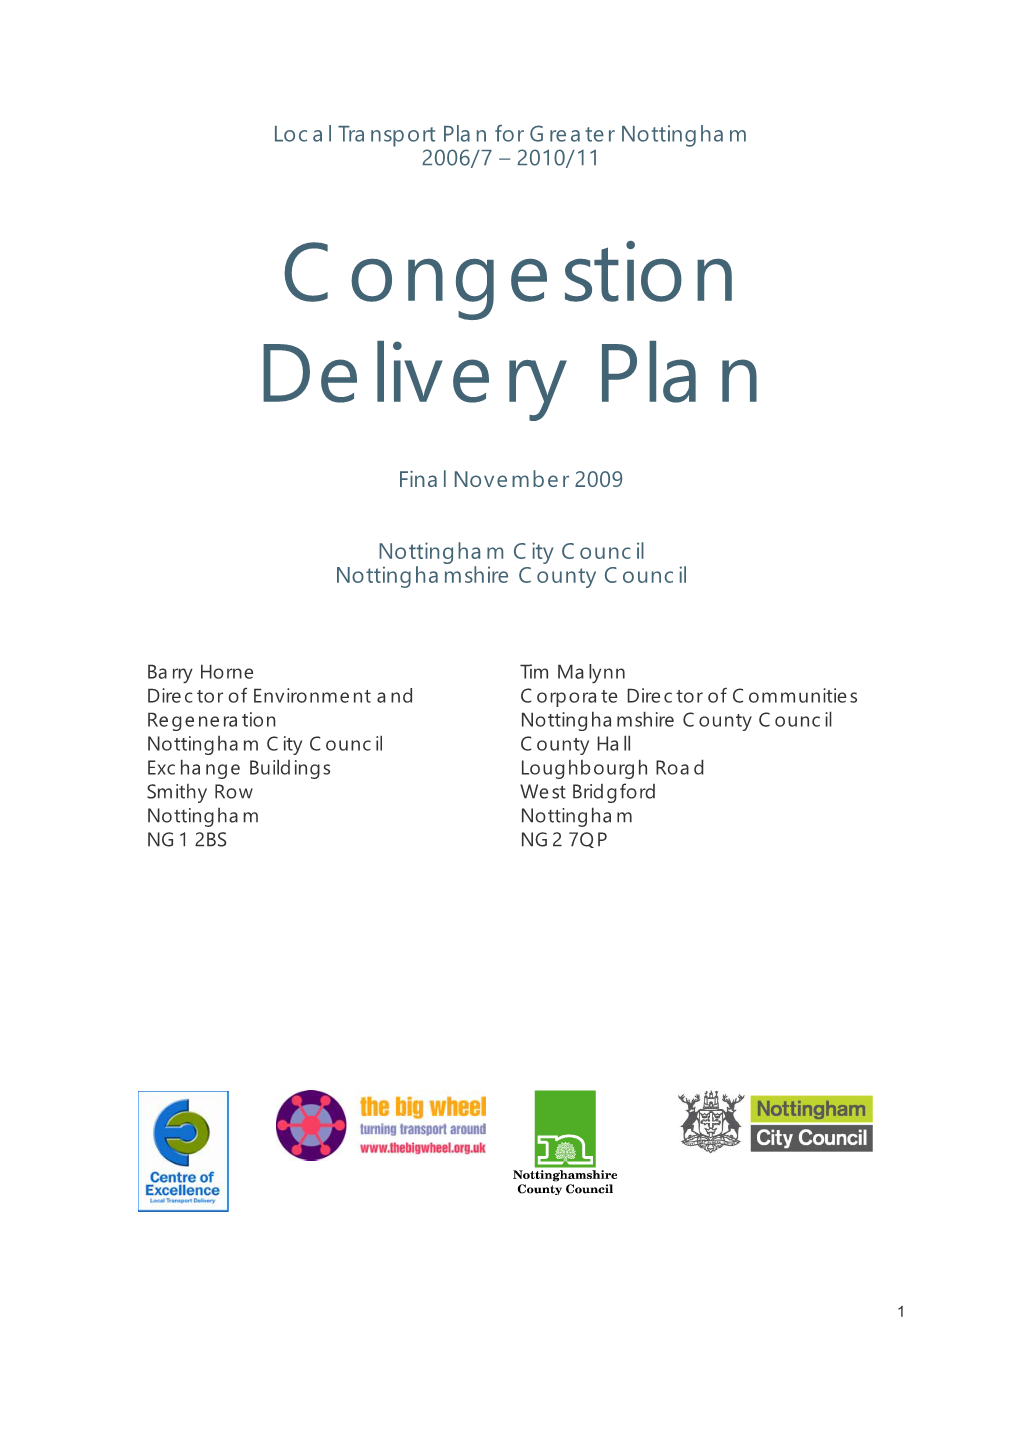 Congestion Delivery Plan